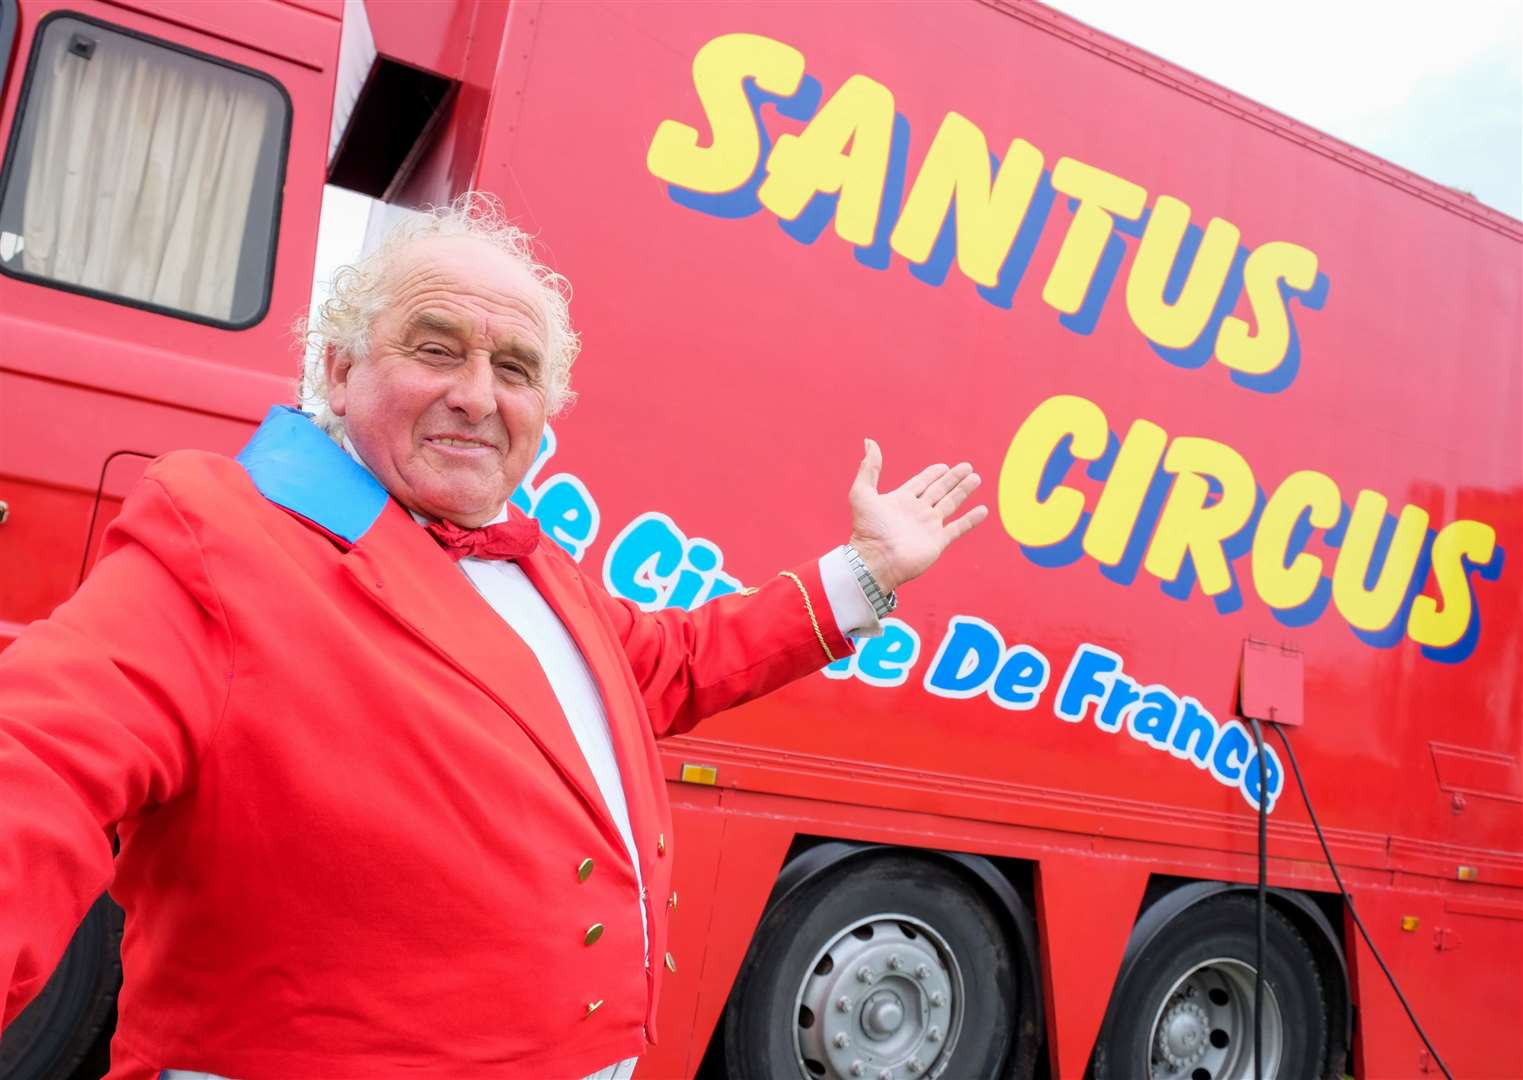 Ernest Santus says the circus received no further complaints from neighbouring residents